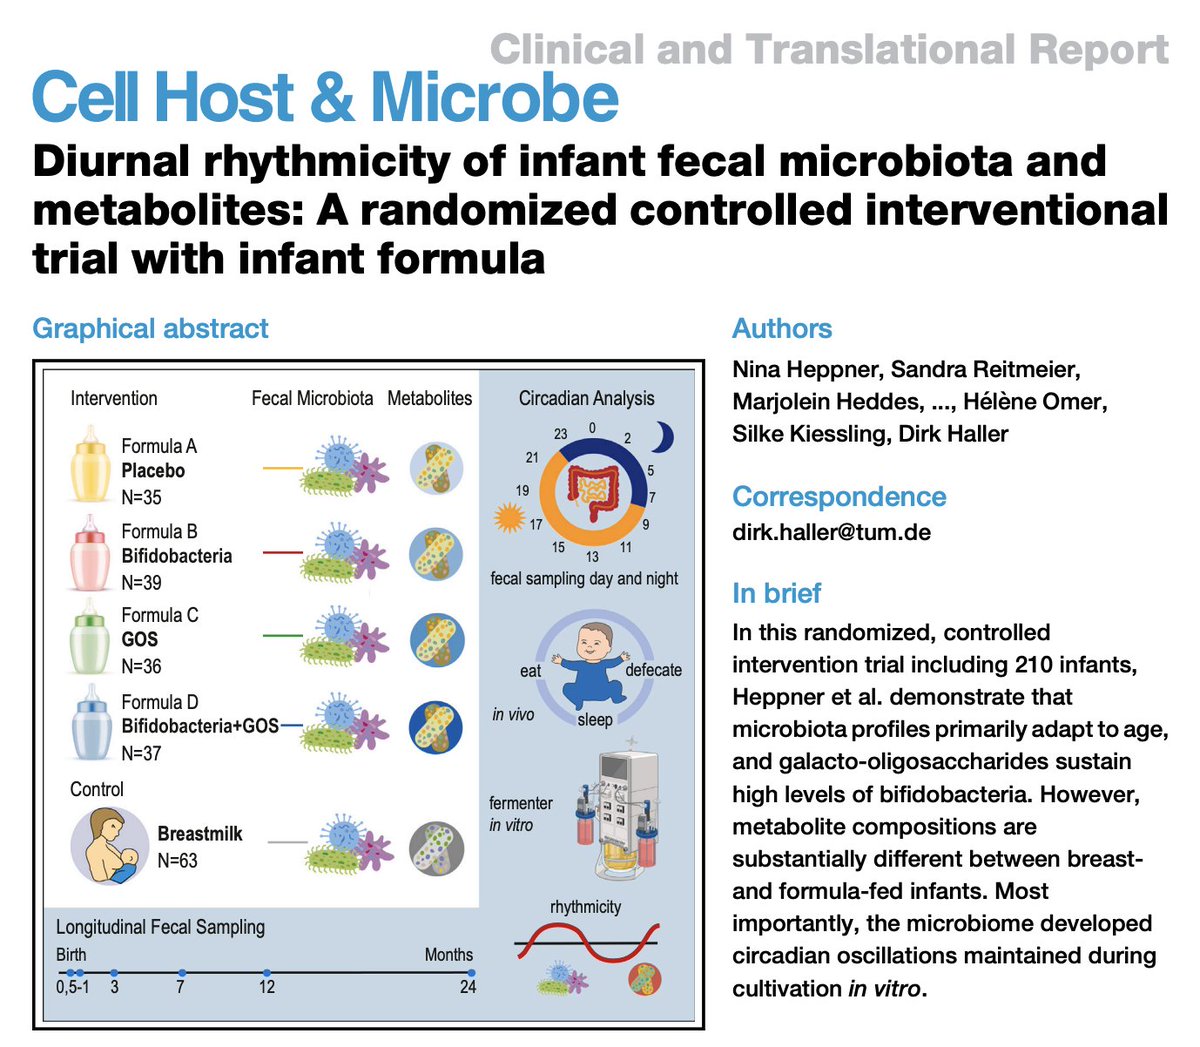 'Diurnal #rhythmicity of infant fecal #microbiota and metabolites: A randomized controlled interventional trial with infant formula' 🍼👶🦠⏰💩. Fascinating study from Dirk Haller lab in @cellhostmicrobe Congrats to Nina Heppner & team!🎉 @HeddesMarjolein @Kiessling_Lab